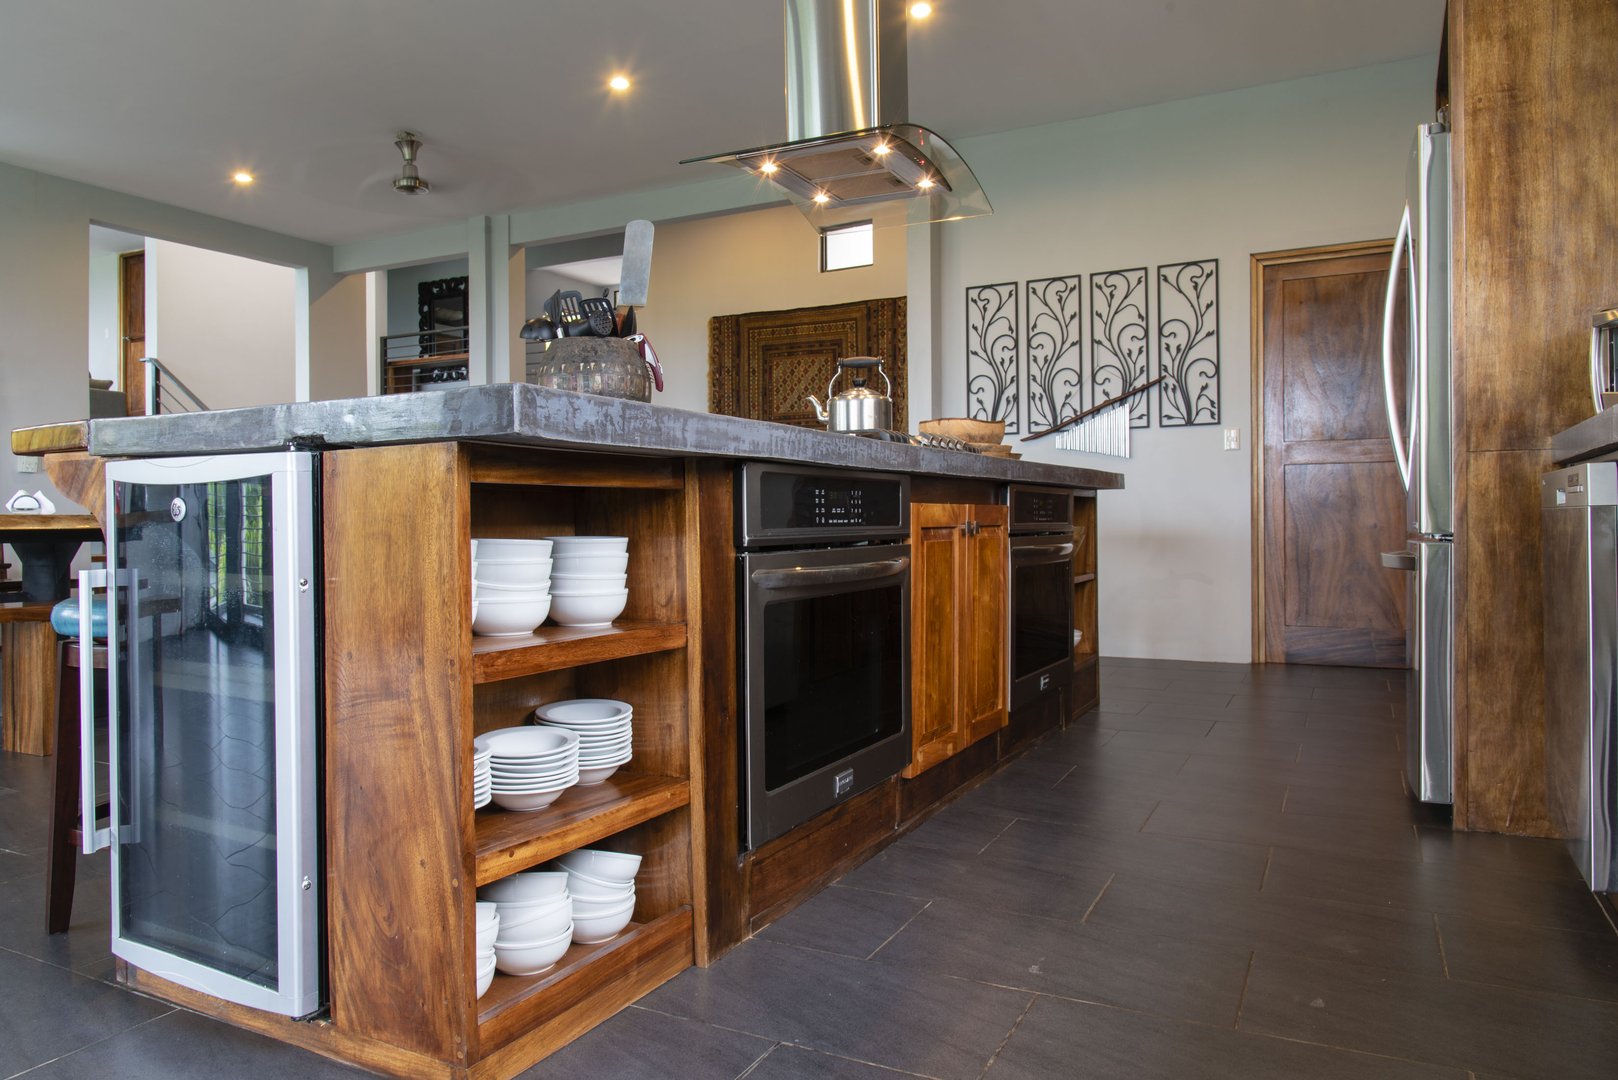 Double ovens, a wine chiller, and custom made counter tops are the luxury appointments to the kitchen at this deluxe rental in Manuel Antonio.